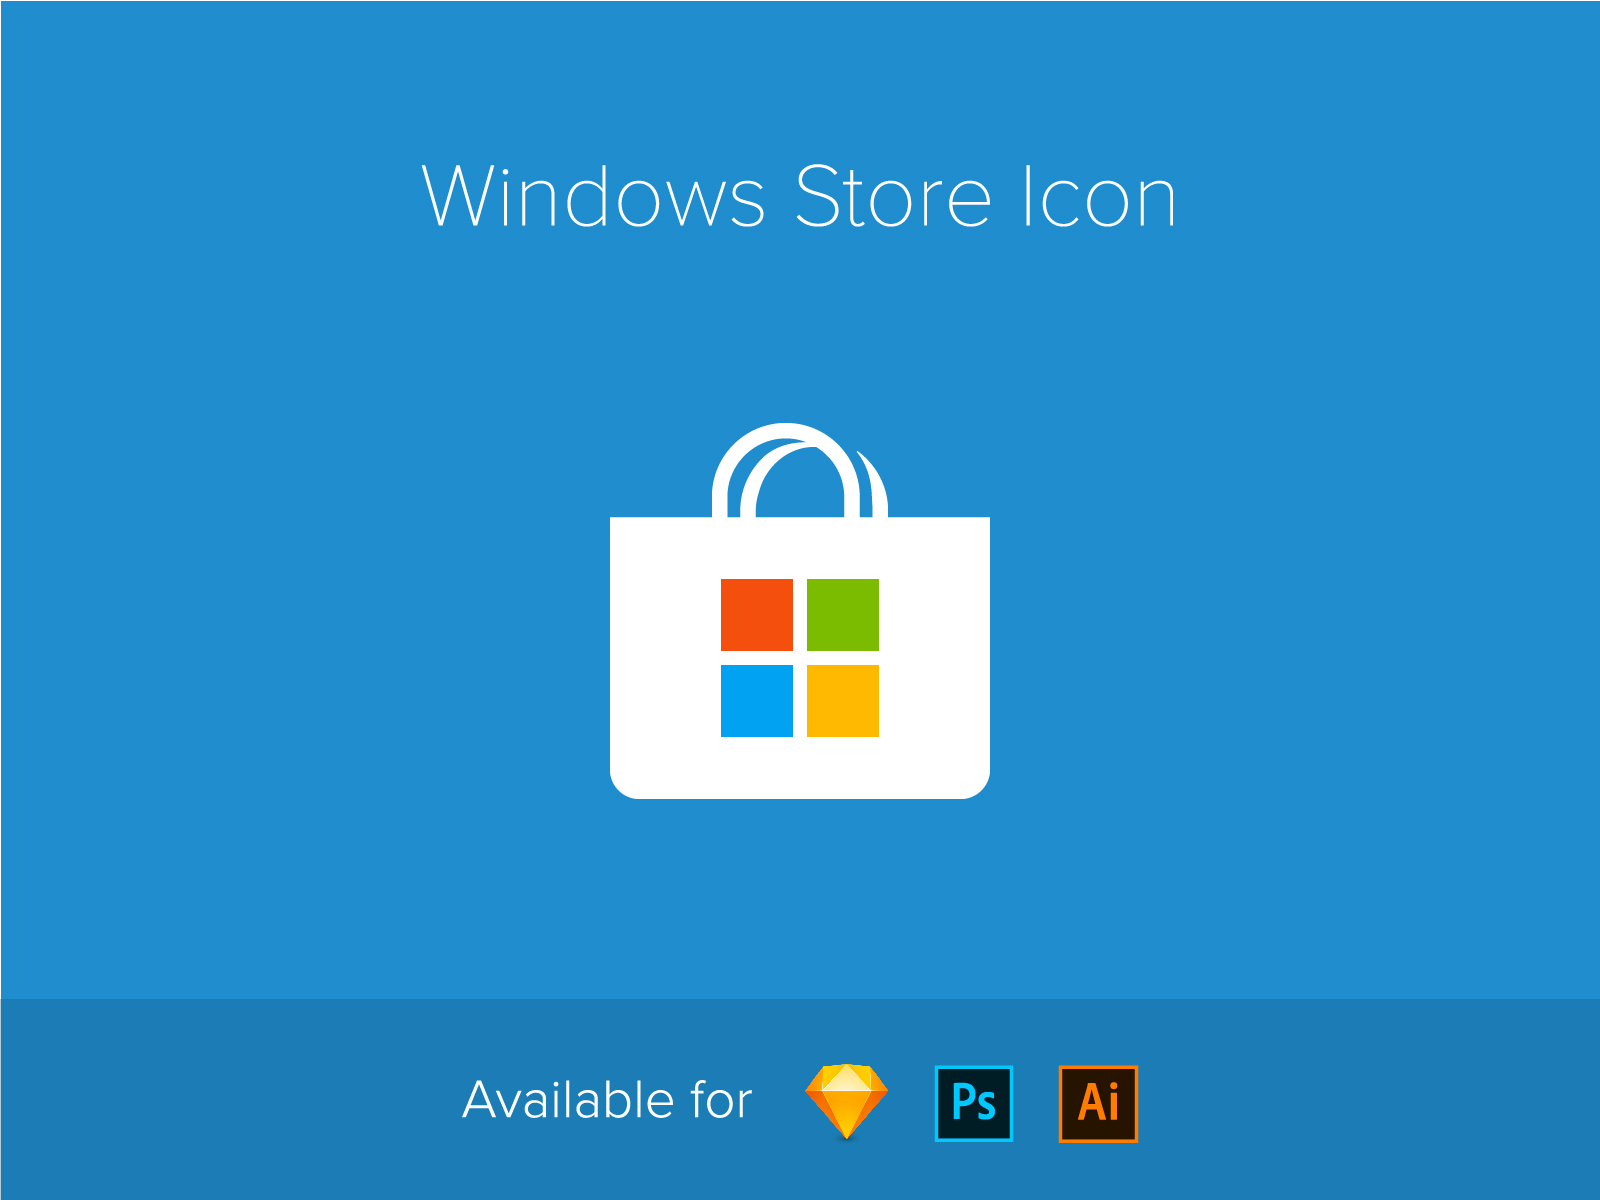 Windows Store icon (vector) by Alexander N. on Dribbble